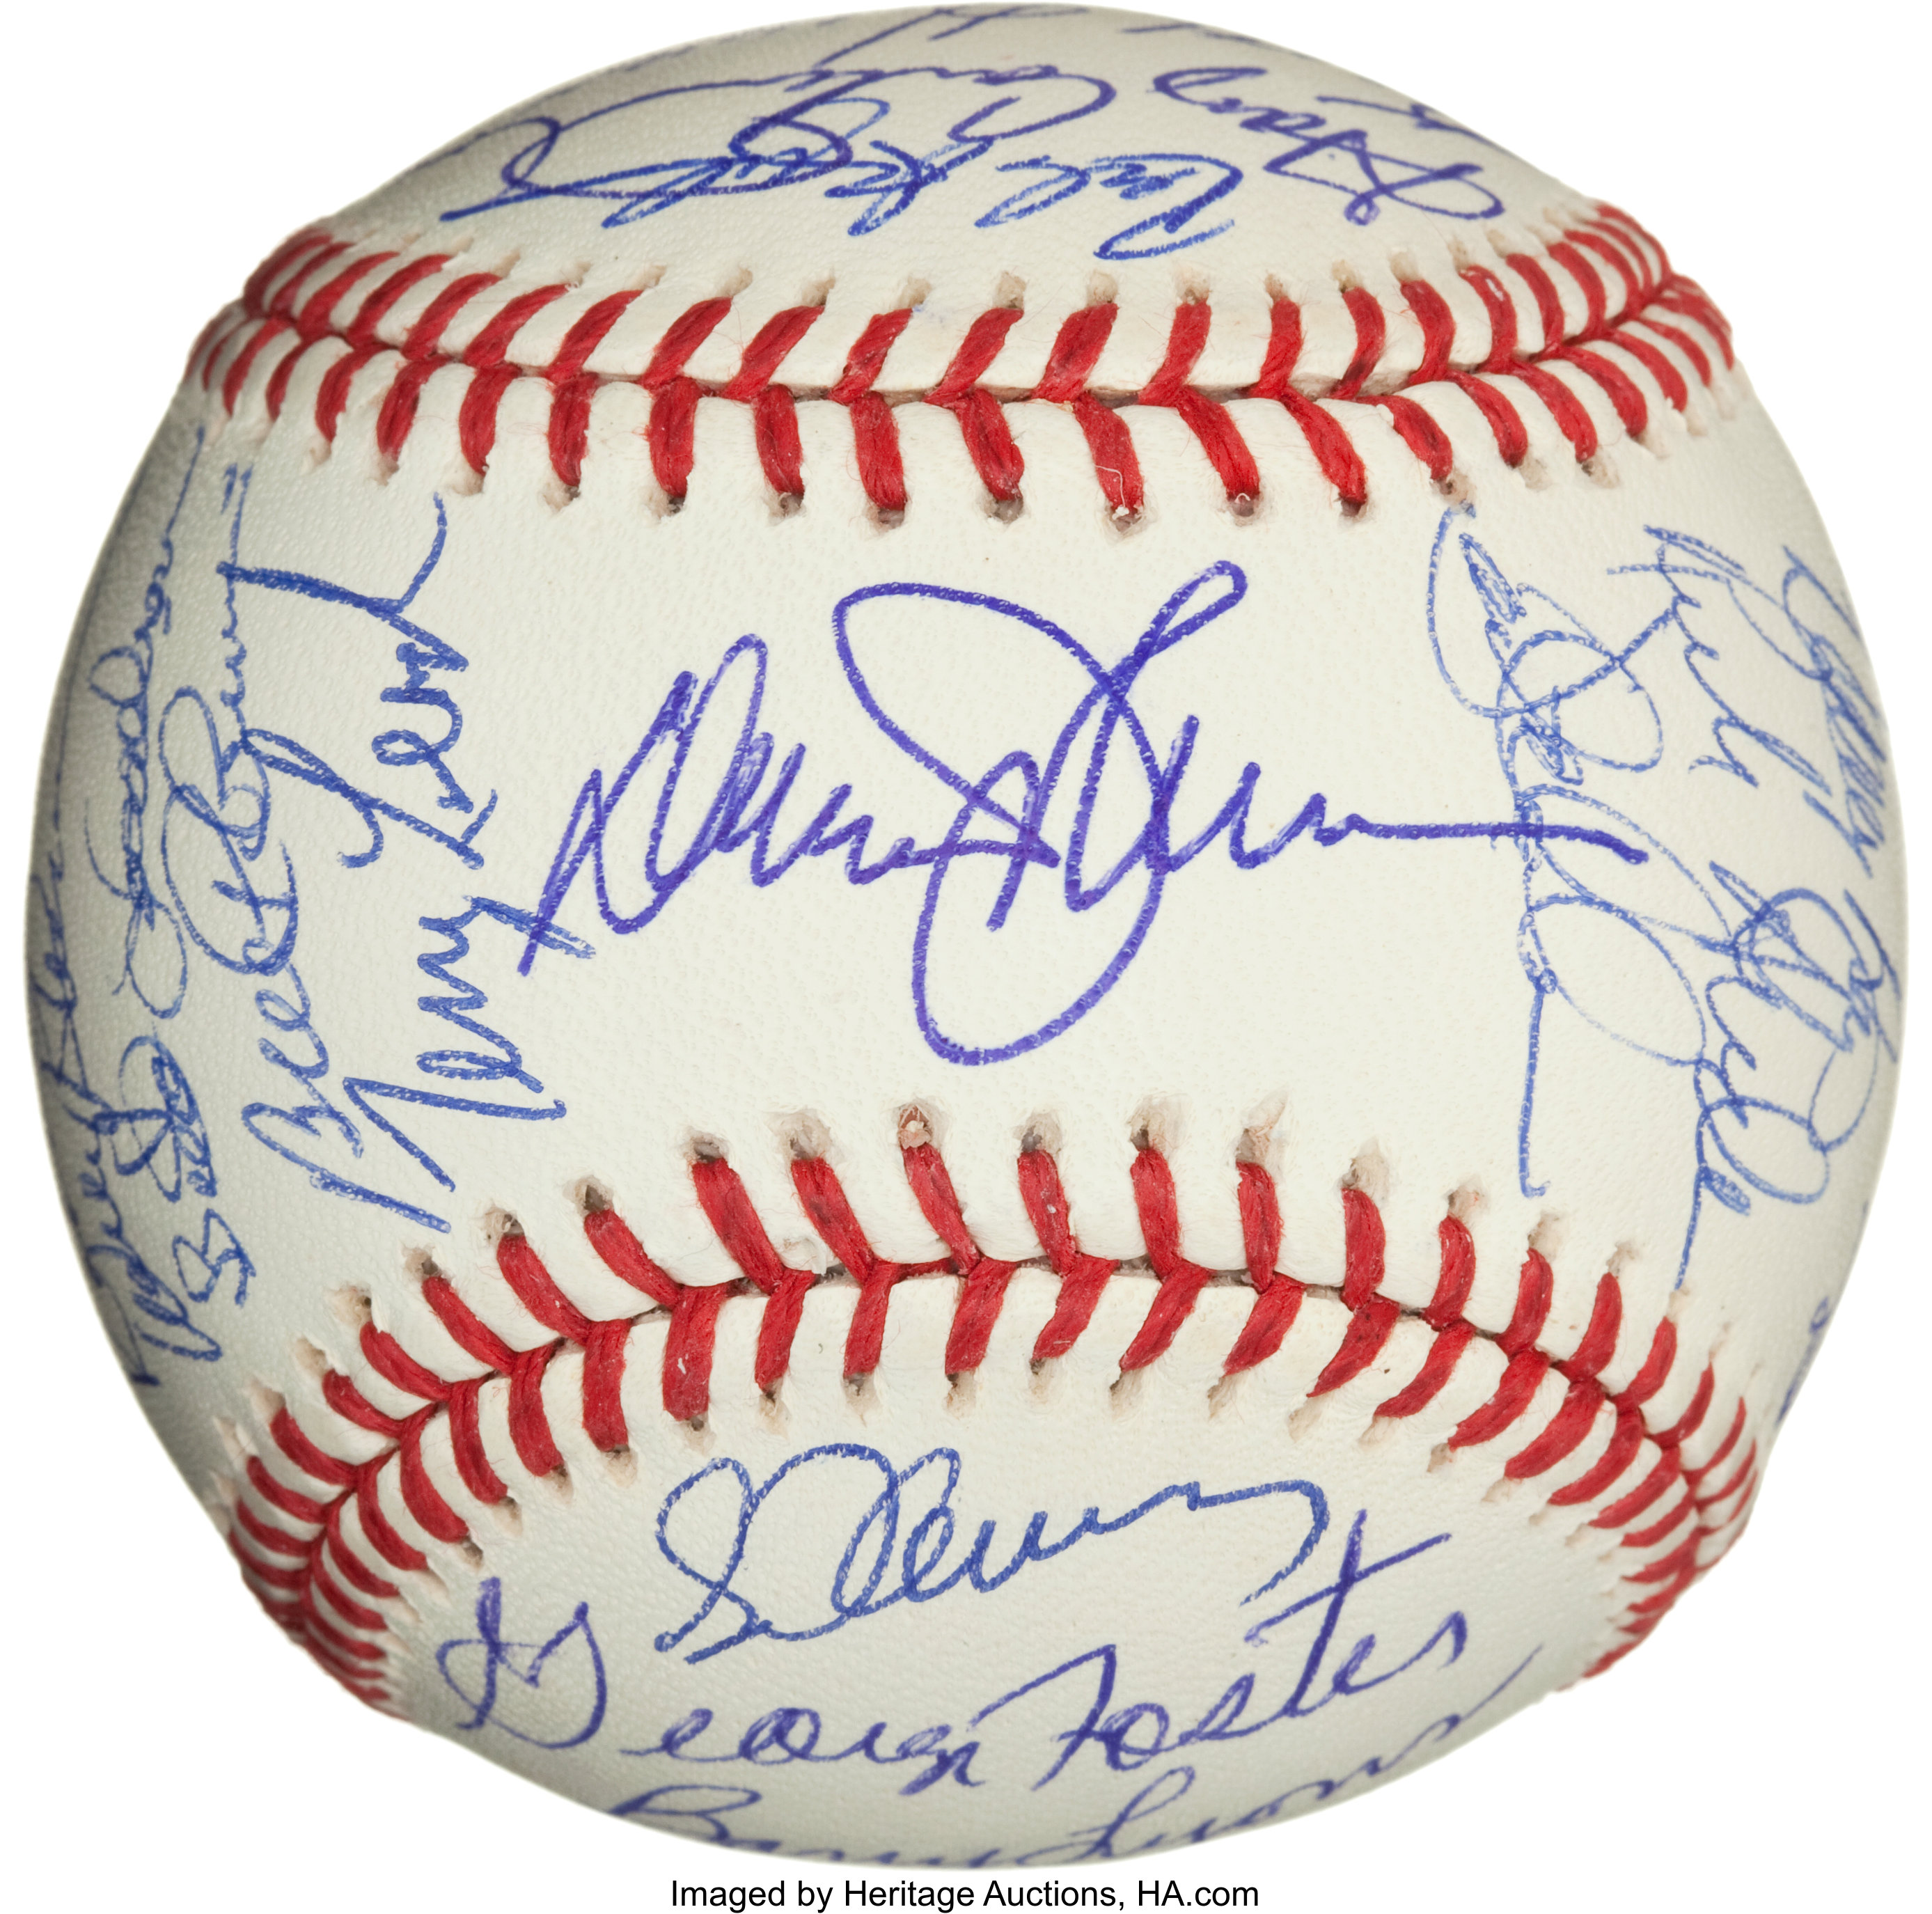 1986 World Series Baseball Signed by New York Mets Team